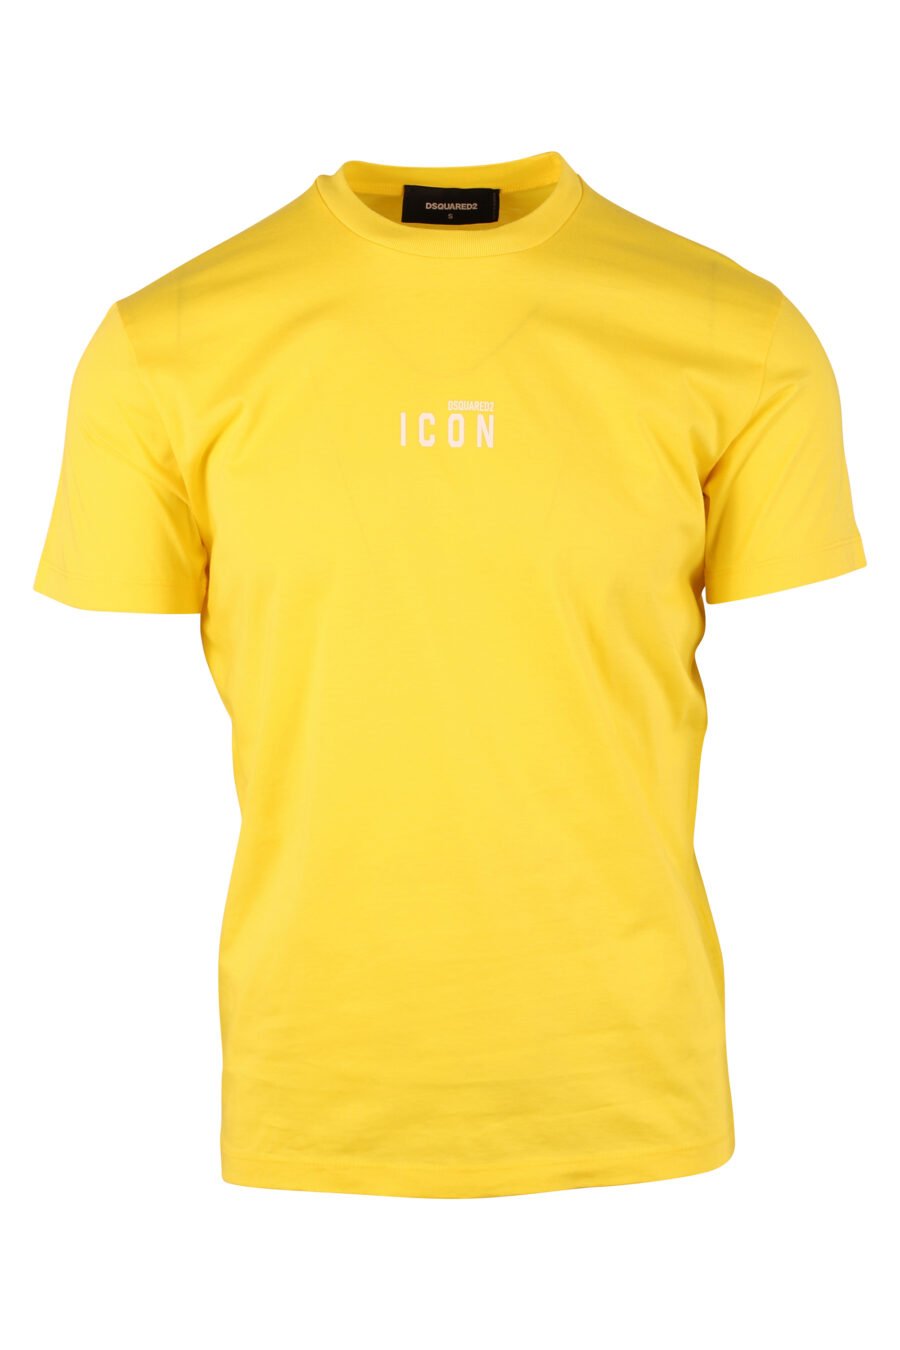 Yellow T-shirt with minilogue "icon" - IMG 9739